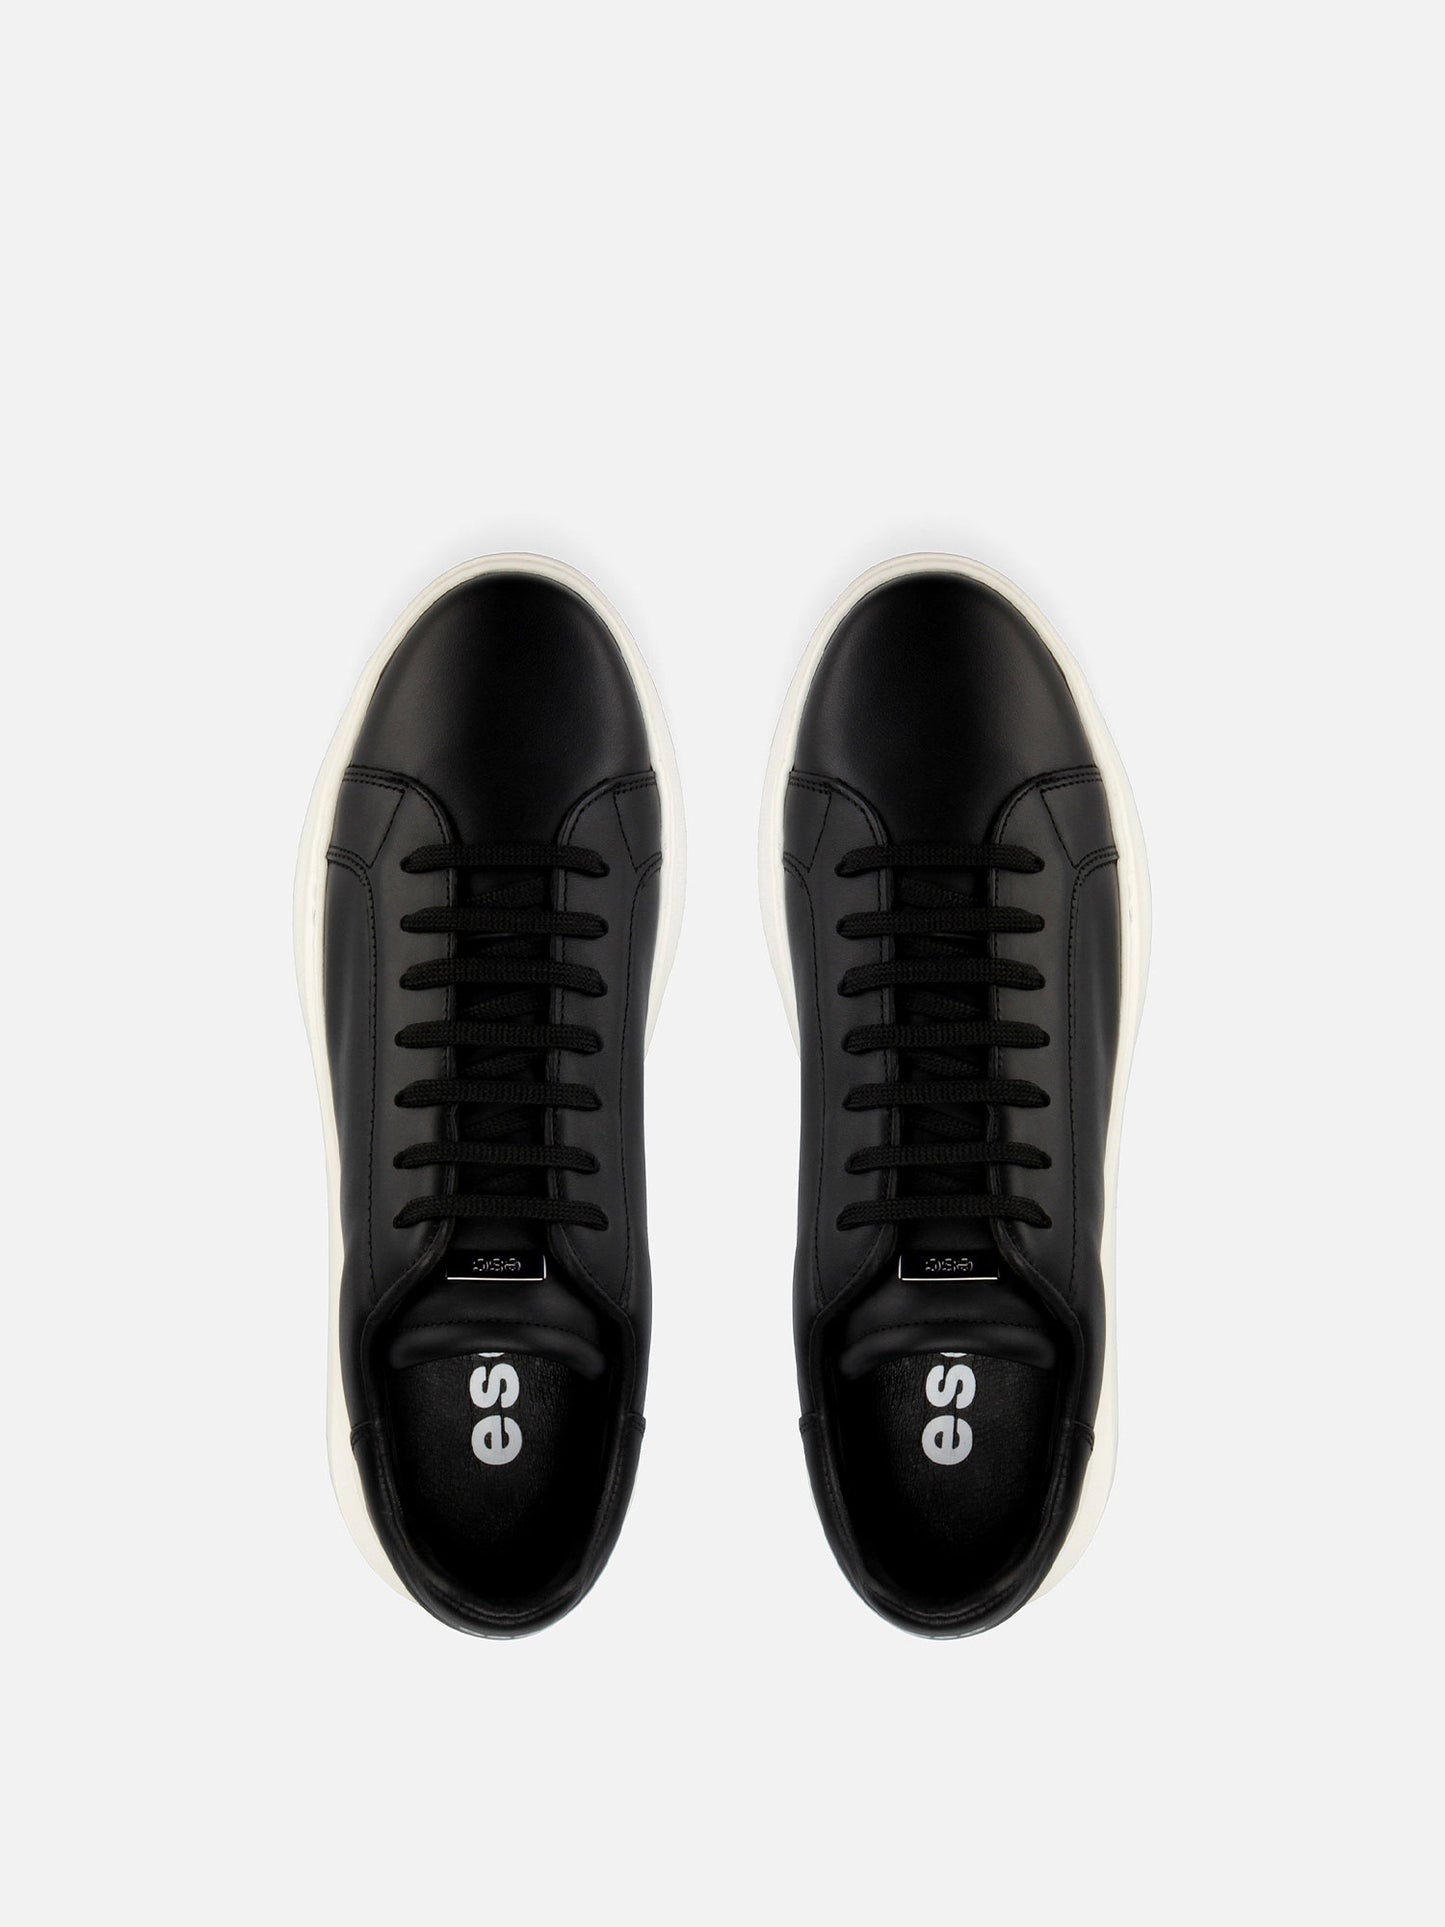 BOT Leather Sneakers - Black